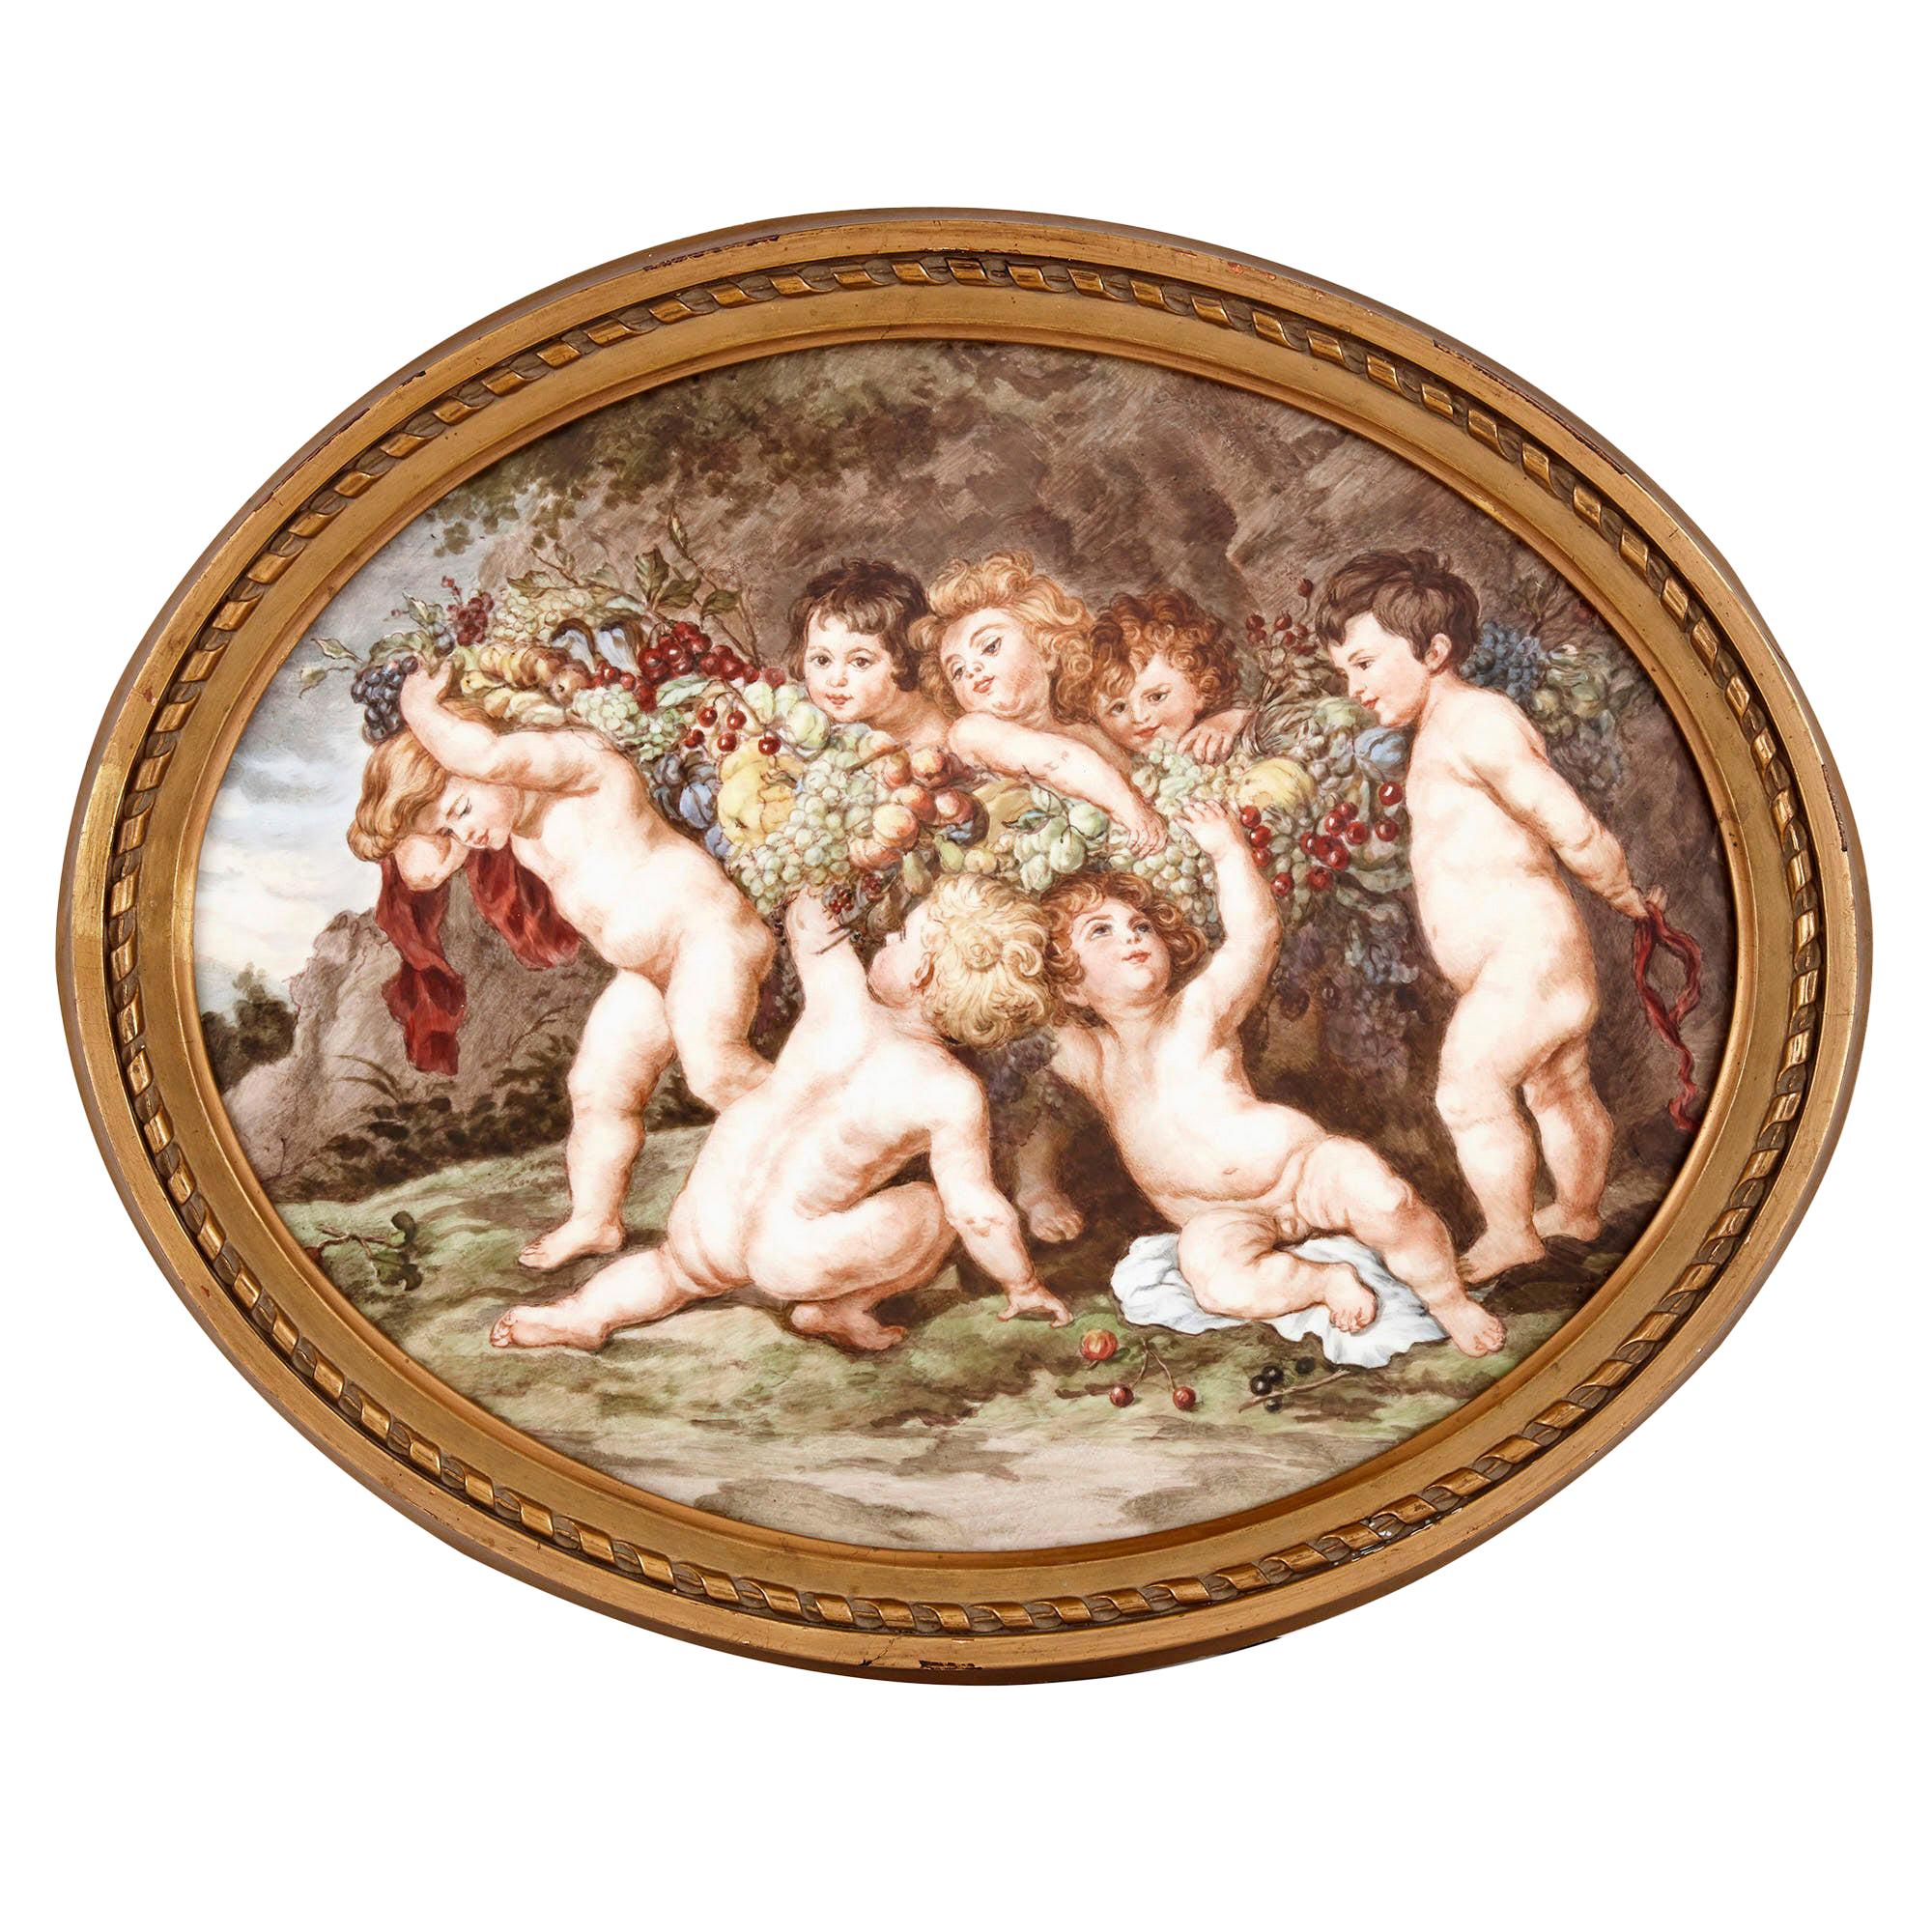 Oval Porcelain Plaque with a Painted Scene after Rubens